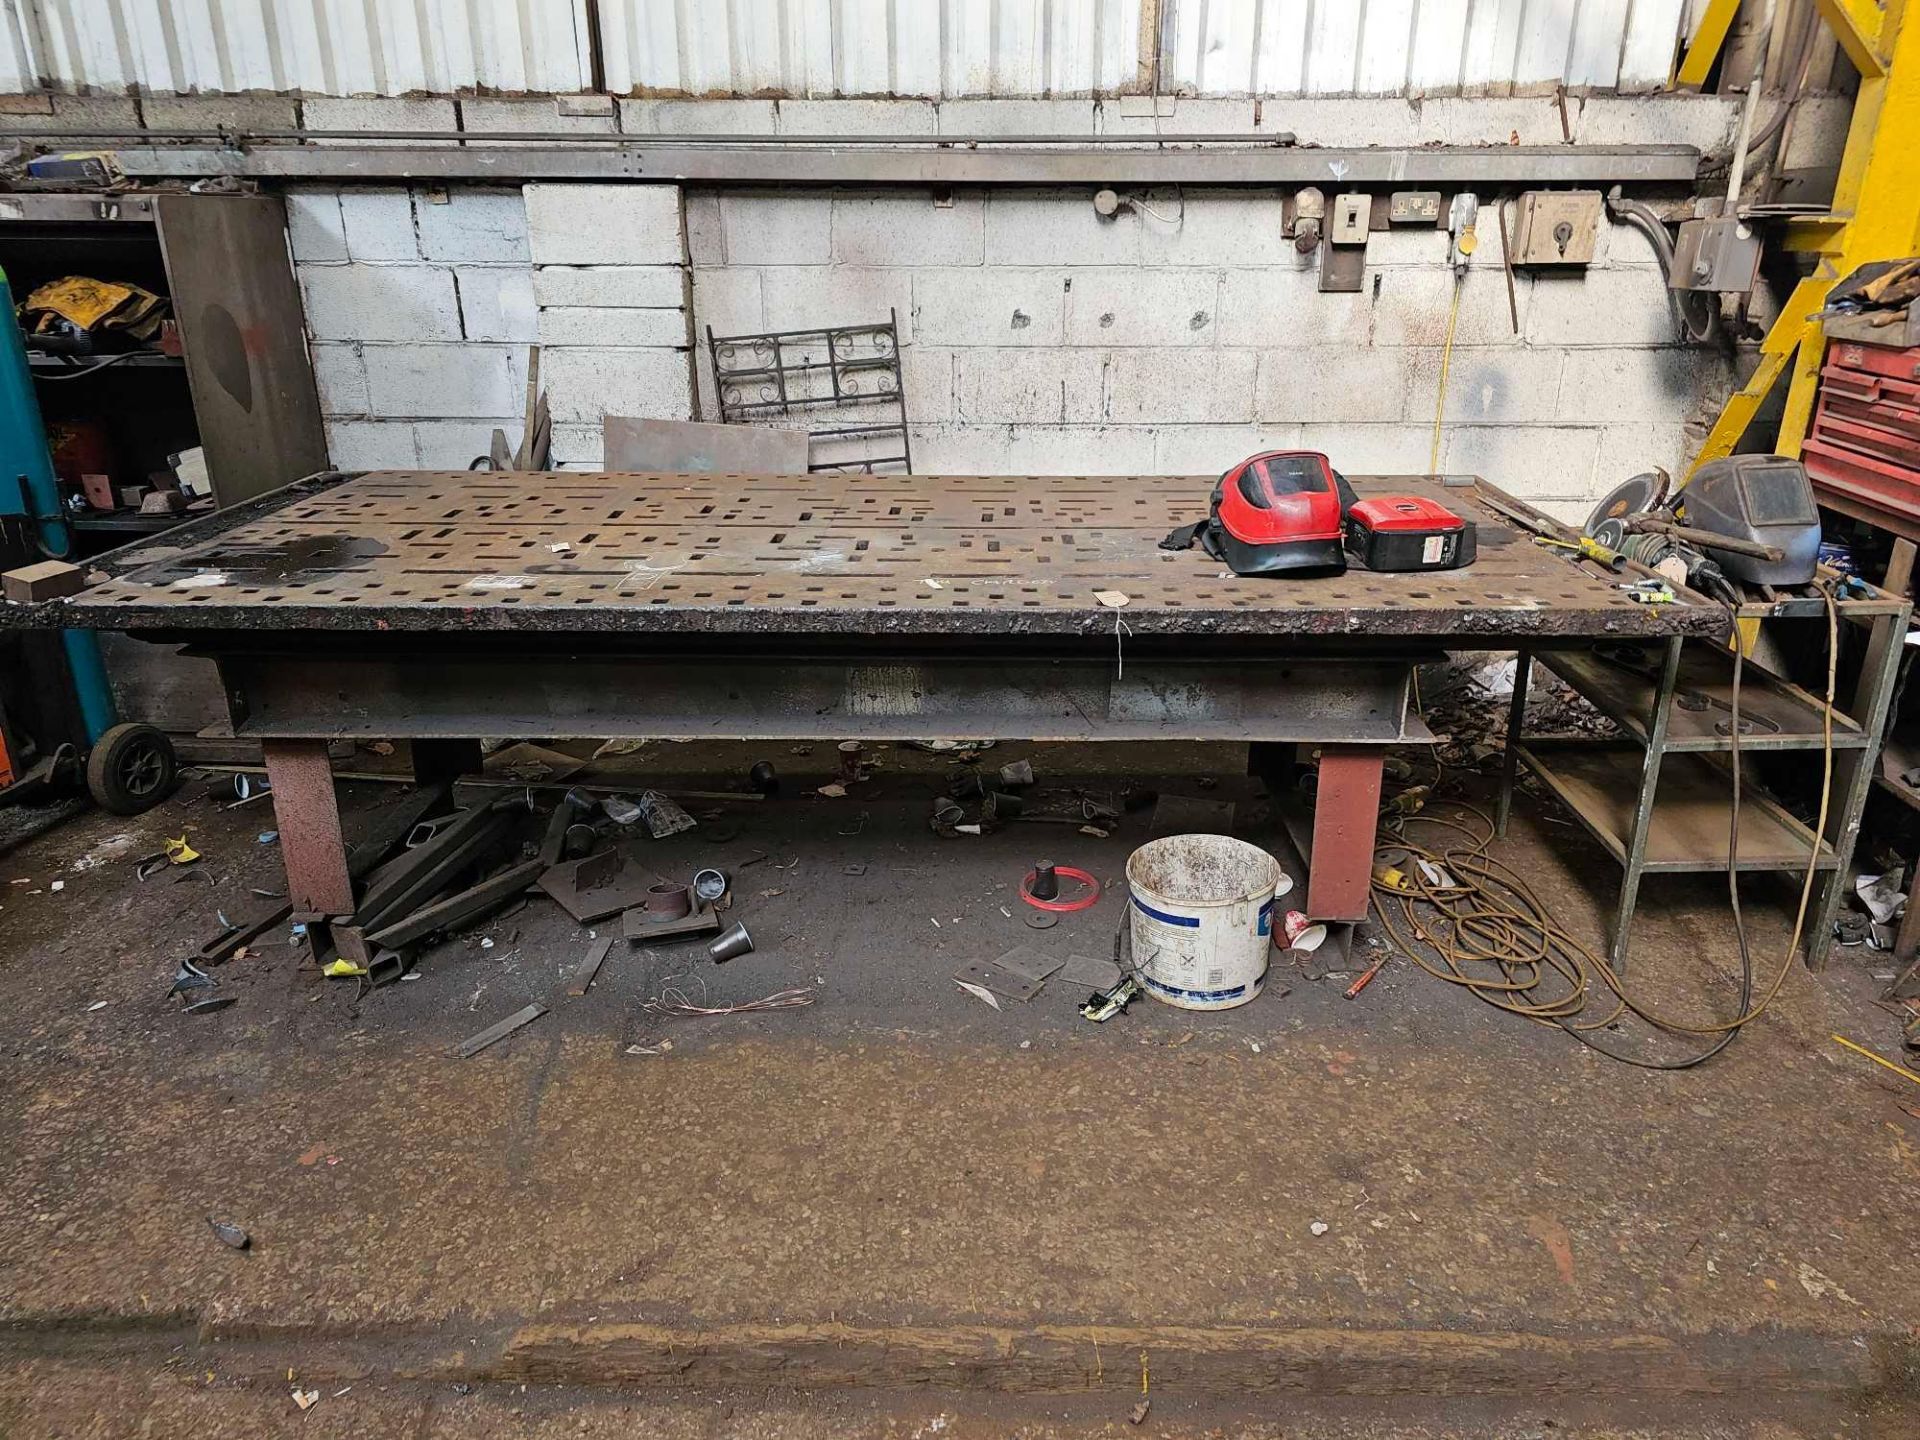 Cast Steel Engineers Marking Out Work Bench 310 x 128 x 91cm Weight 2000kg